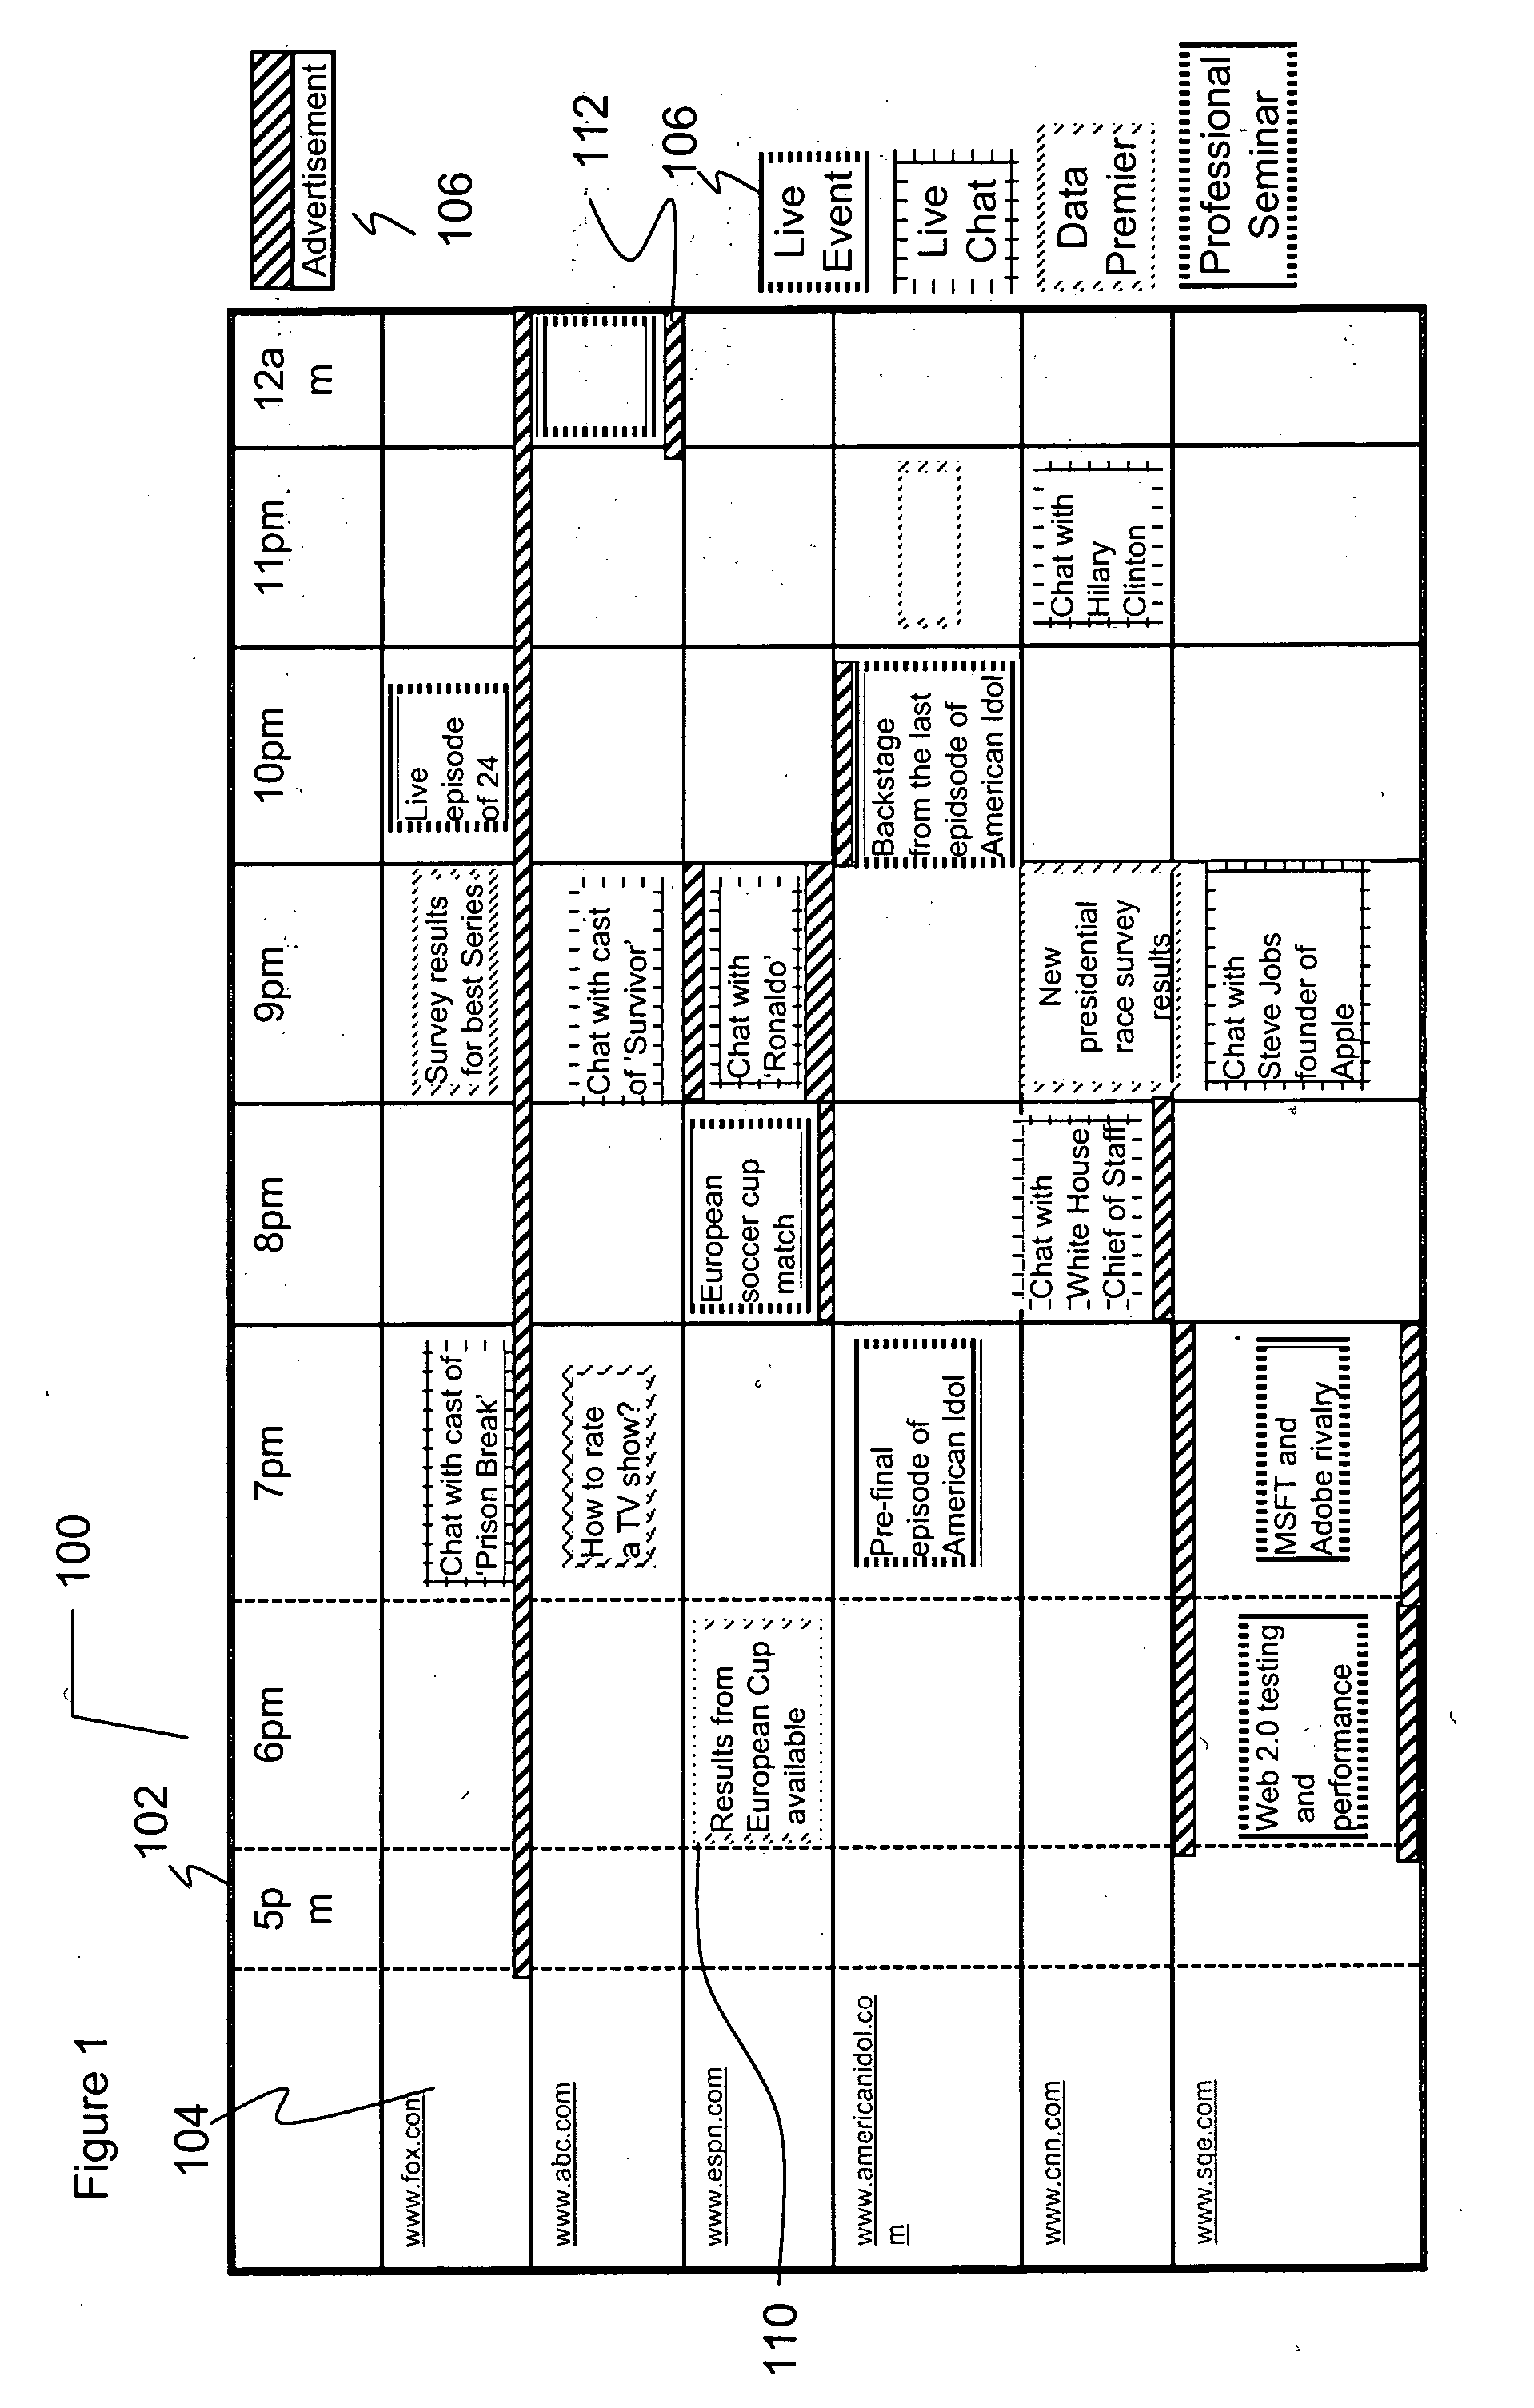 System and method for an event scheduler